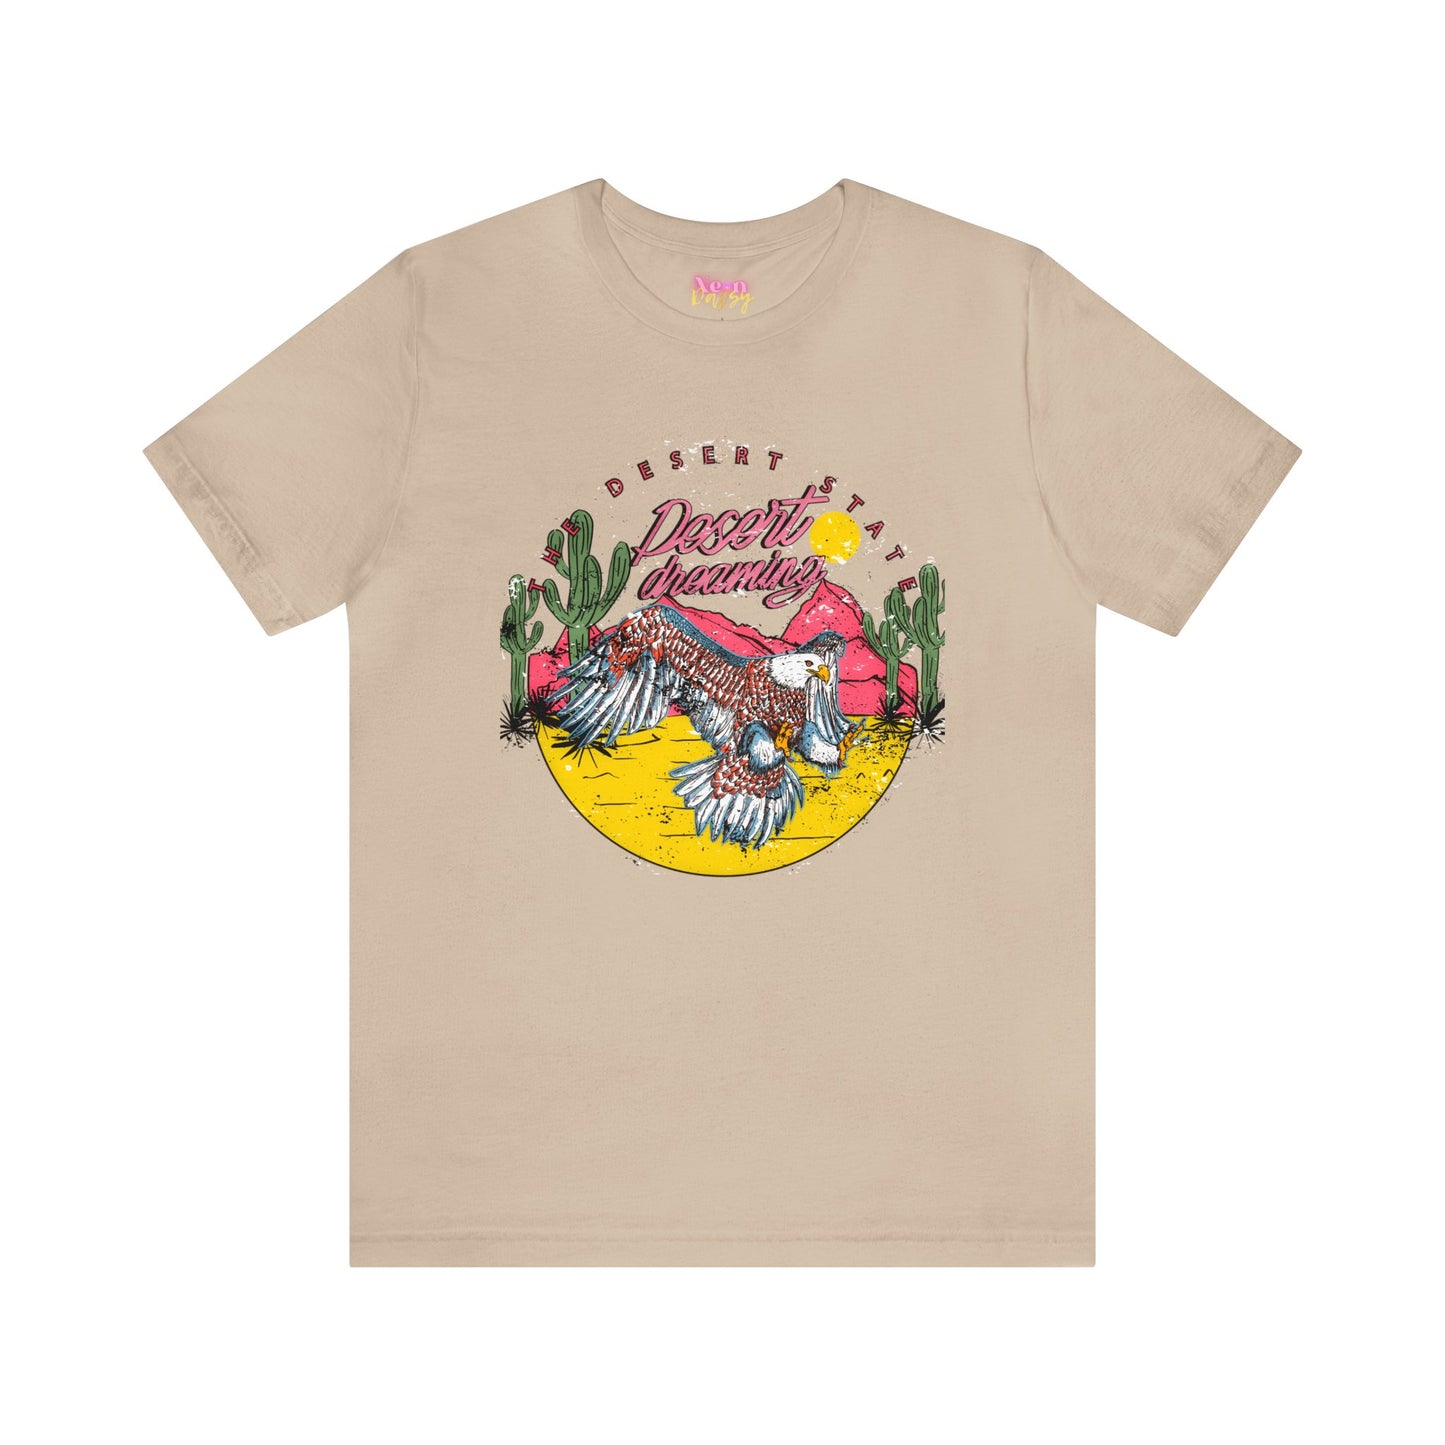 The Desert State of Dreaming // TEE